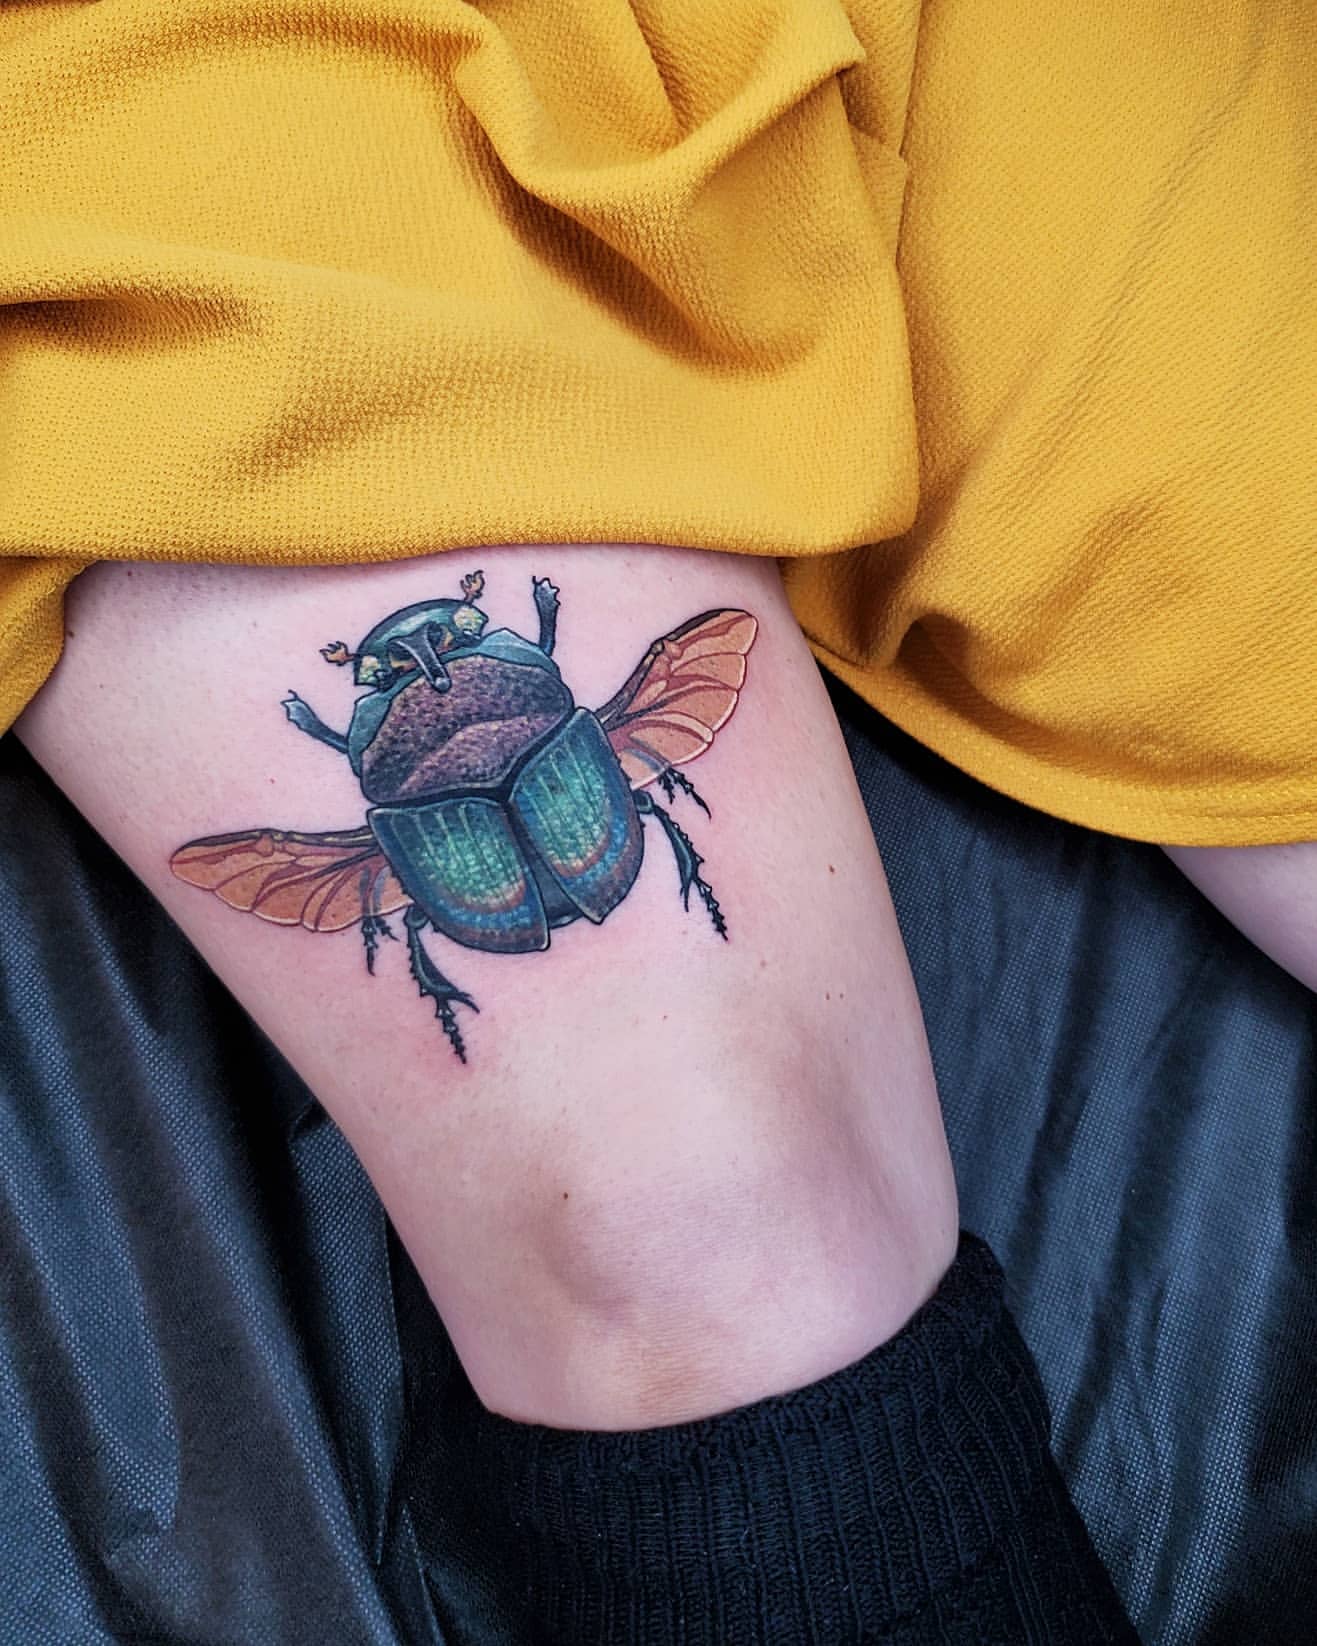 Bee Tattoos: Design Ideas and Meaning - TatRing